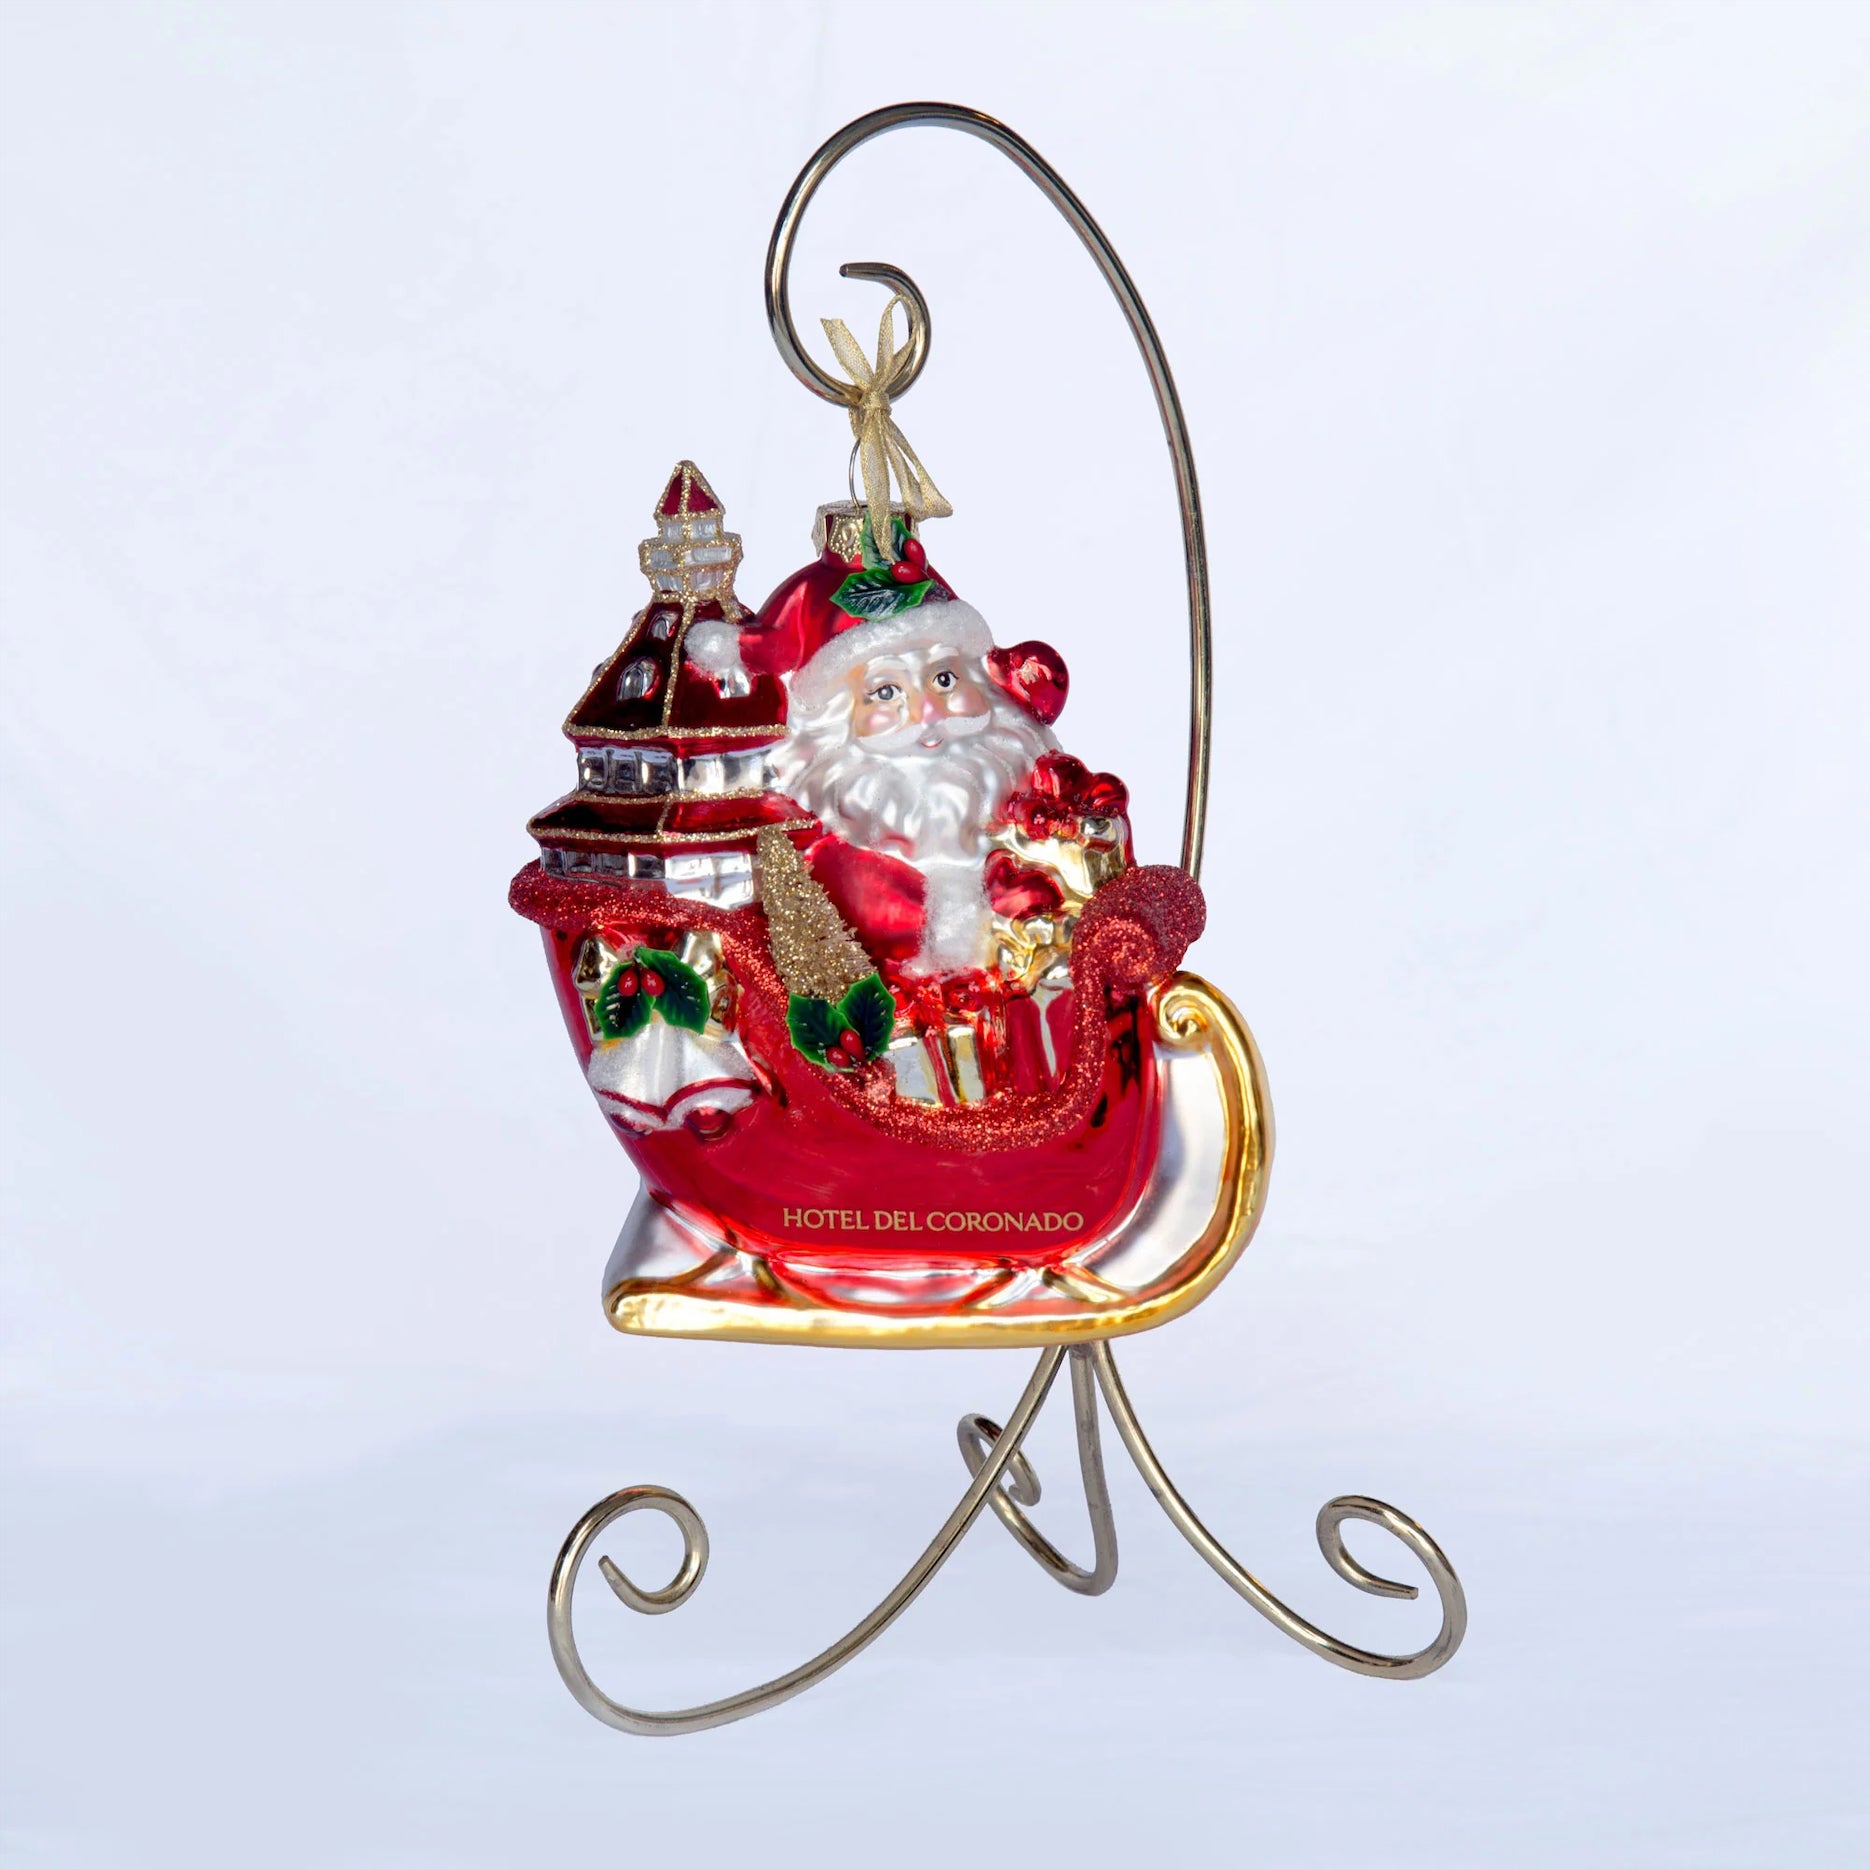 Buy the best-selling Christmas ornaments online